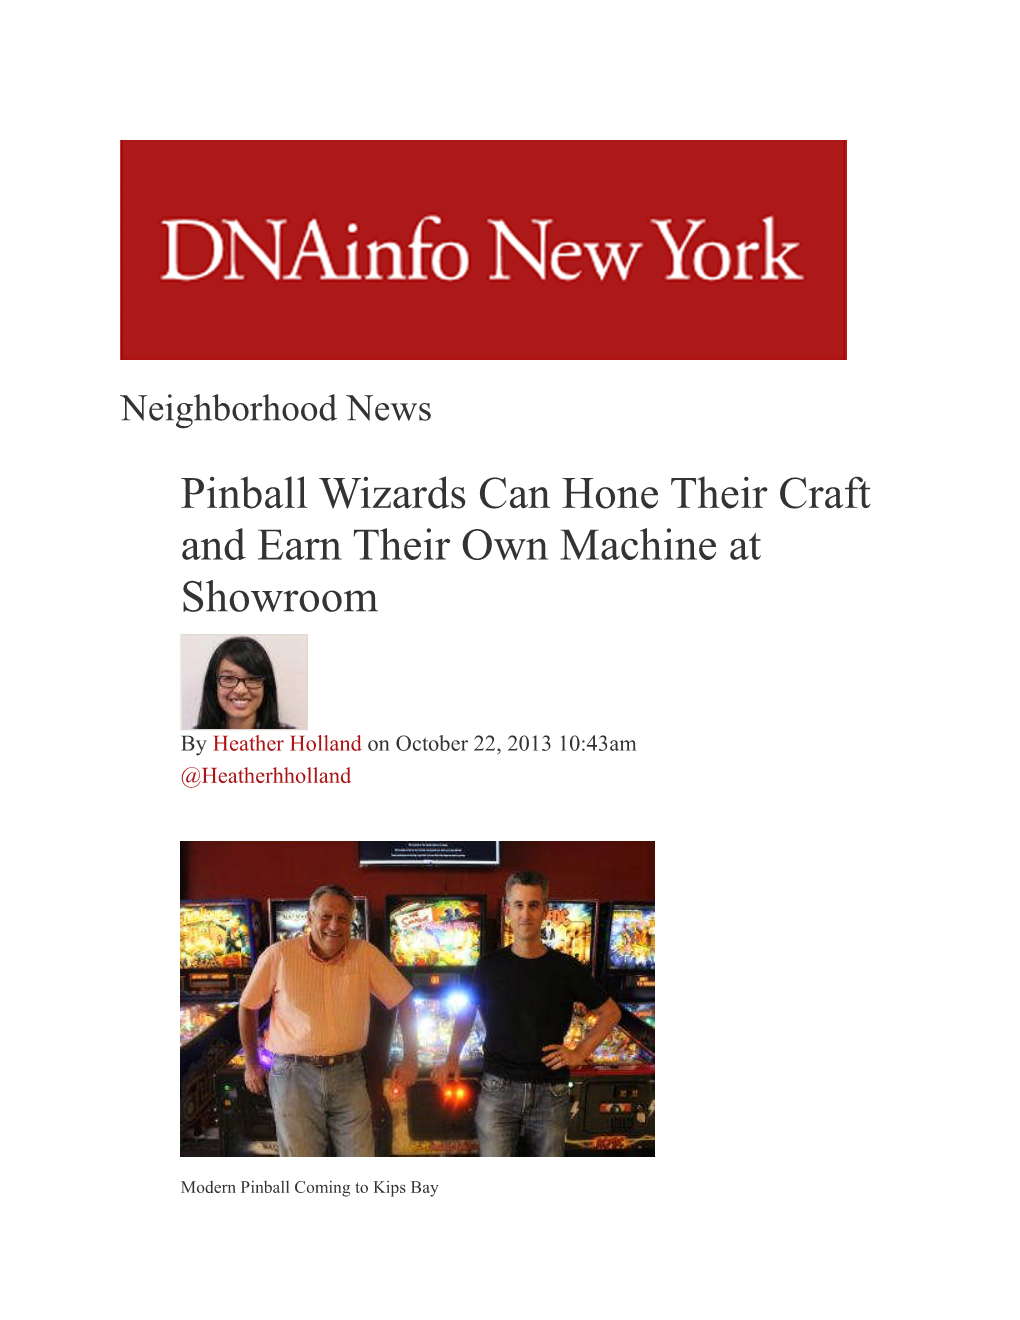 Pinball Wizards Can Hone Their Craft and Earn Their Own Machine at Showroom